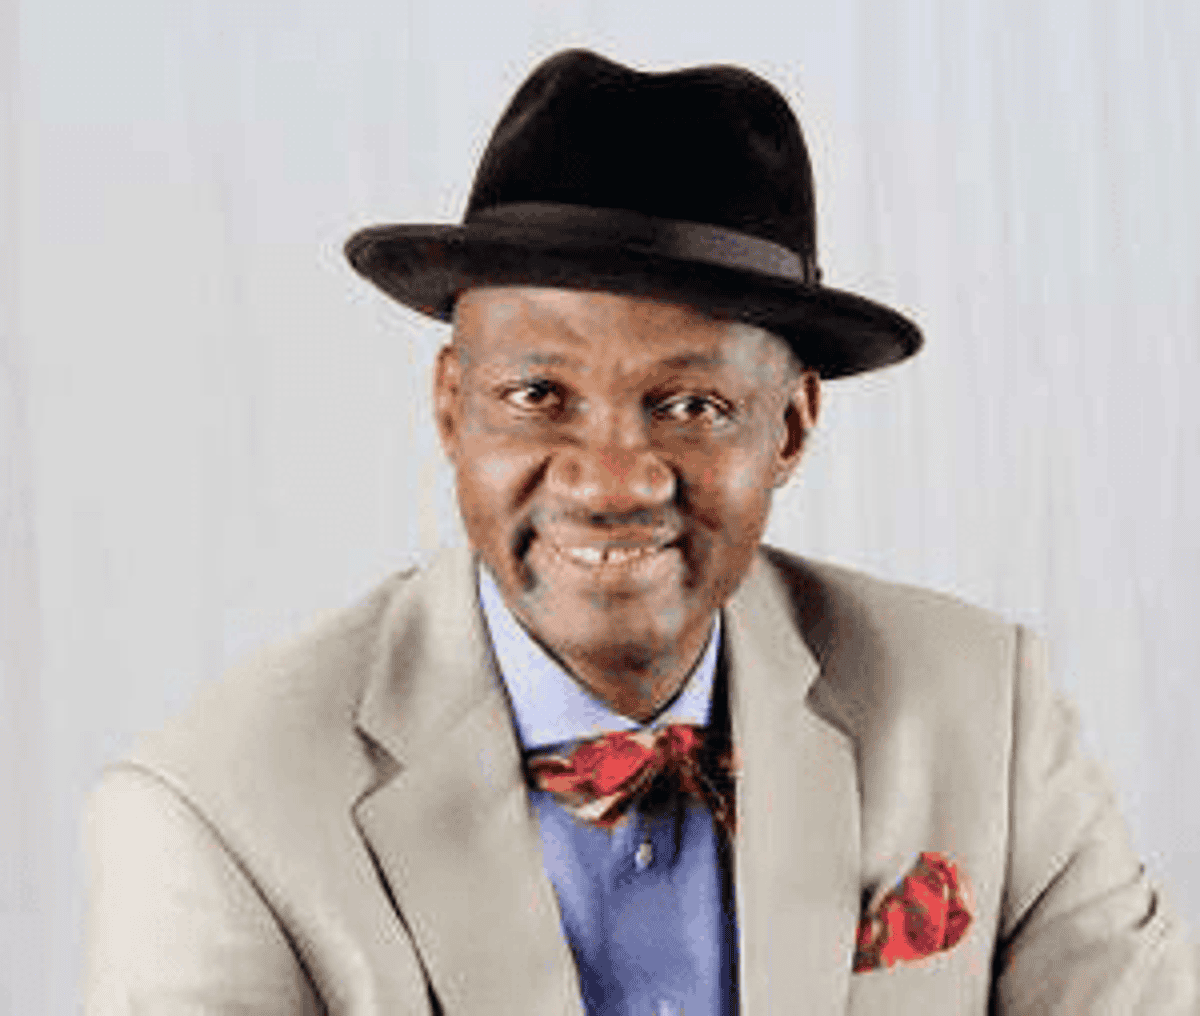 We are set to take over Delta in 2019 — Ojougboh - Vanguard News